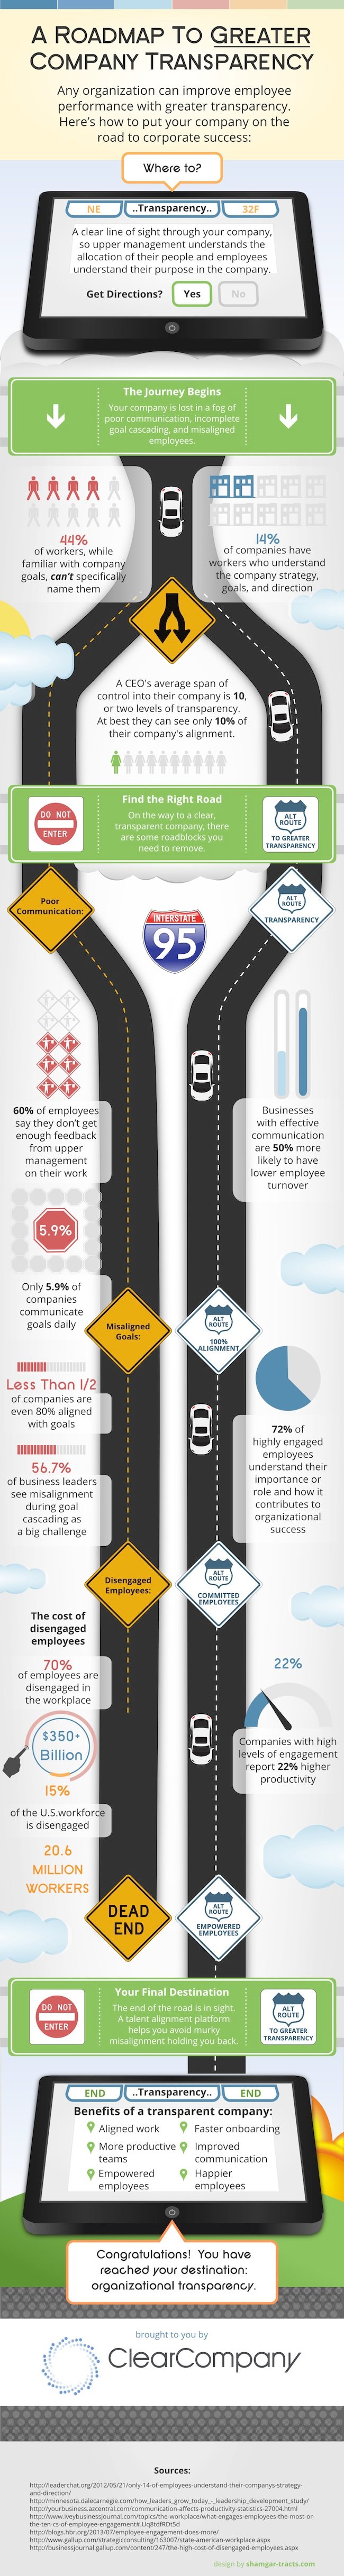 A Roadmap To Greater Company Transparency - Infographic by ClearCompany